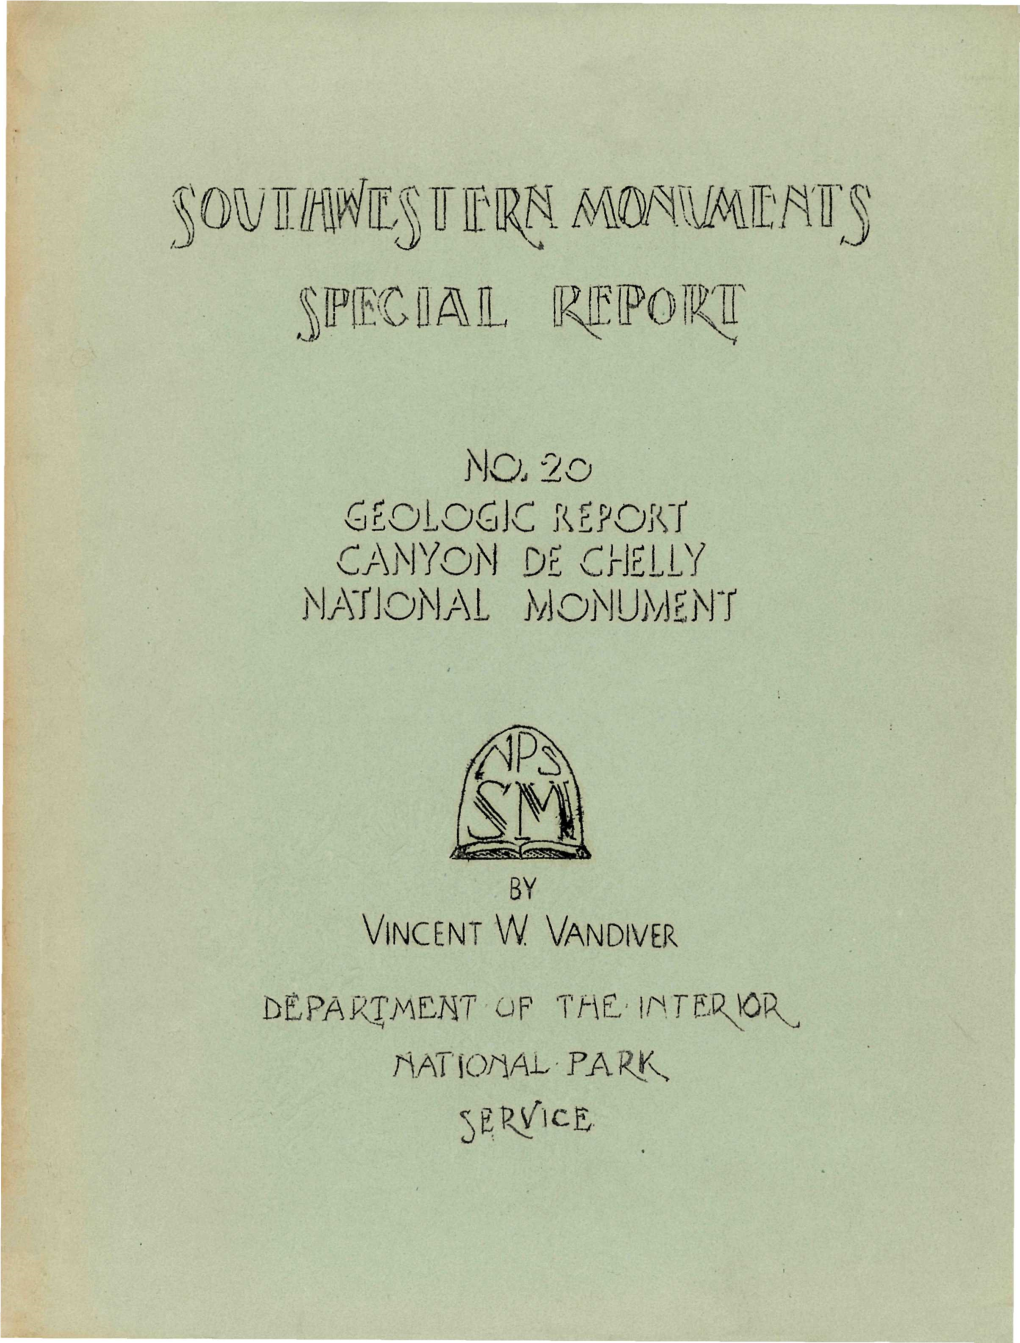 Geologic Report, Canyon De Chelly National Monument